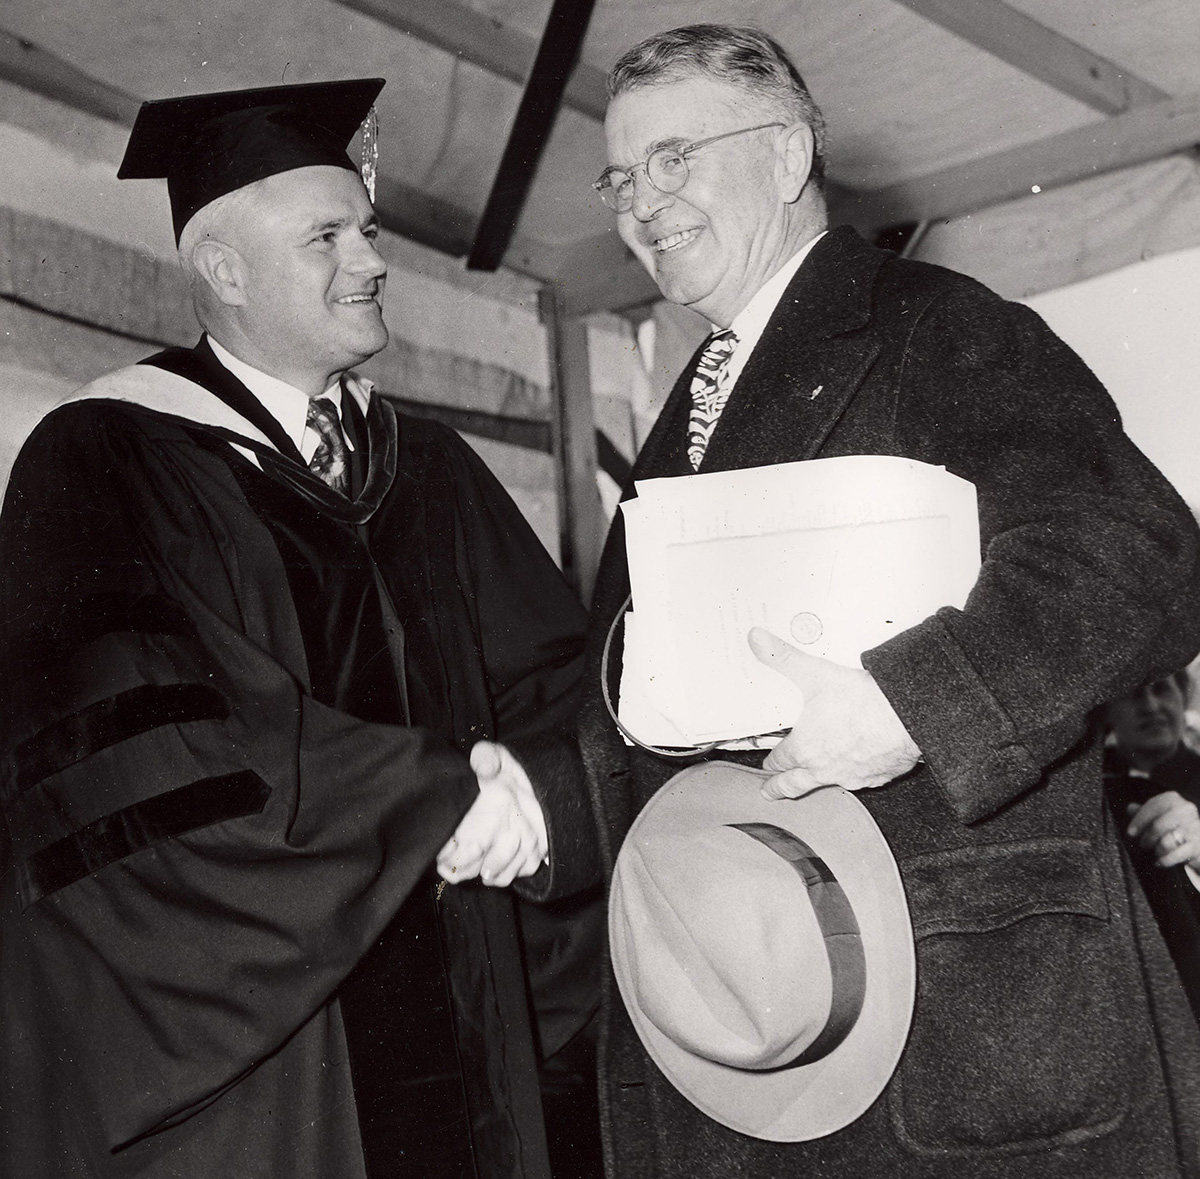 John O. Moseley, left, shakes hands with a man in academic attire.